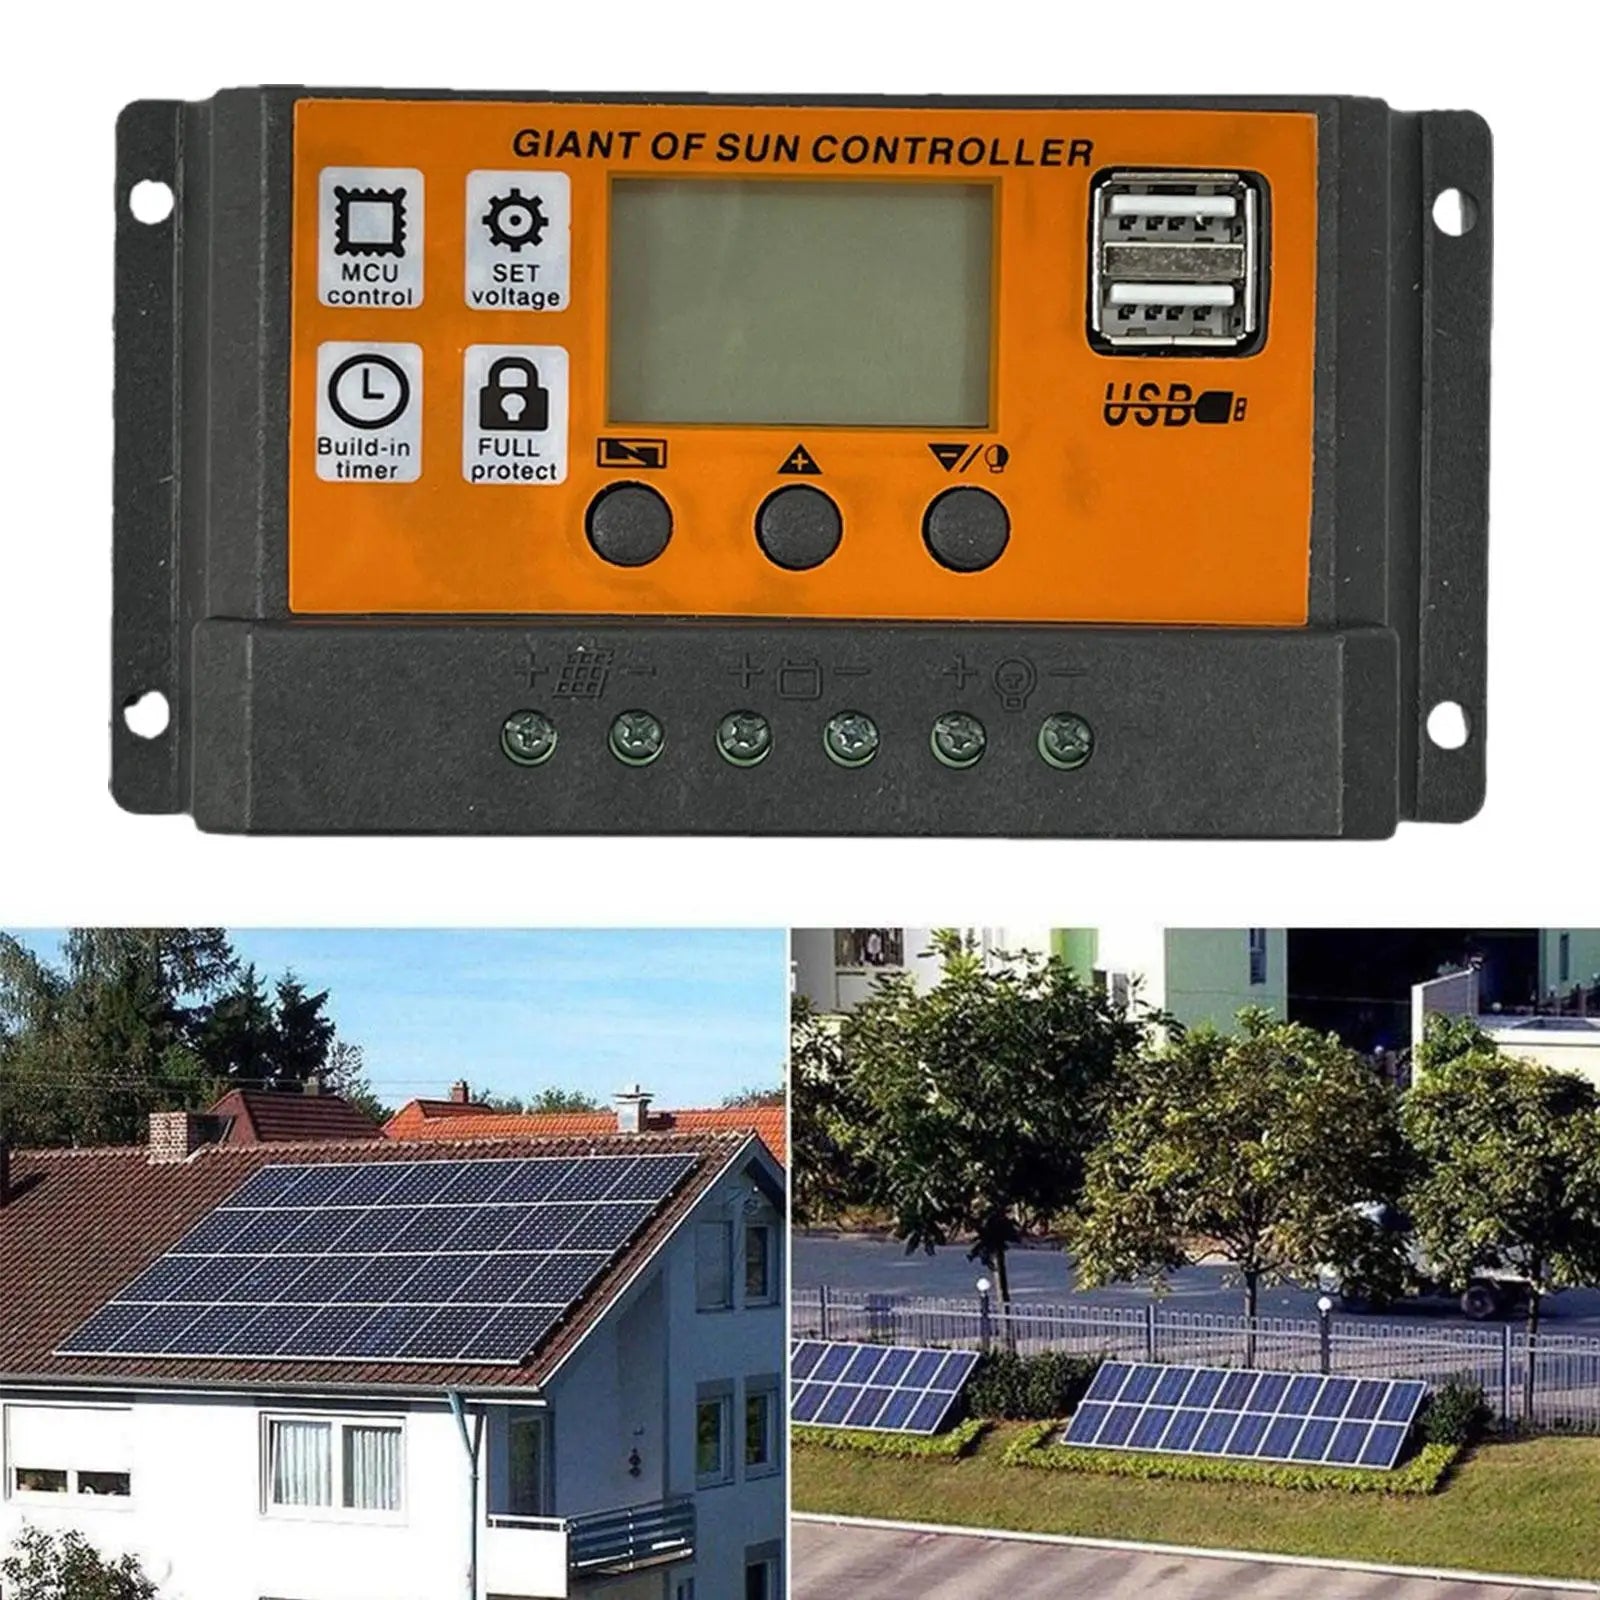 MPPT Solar Charge Controller, High-tech solar charger with timer and overcharge protection for safe, efficient energy harvesting.